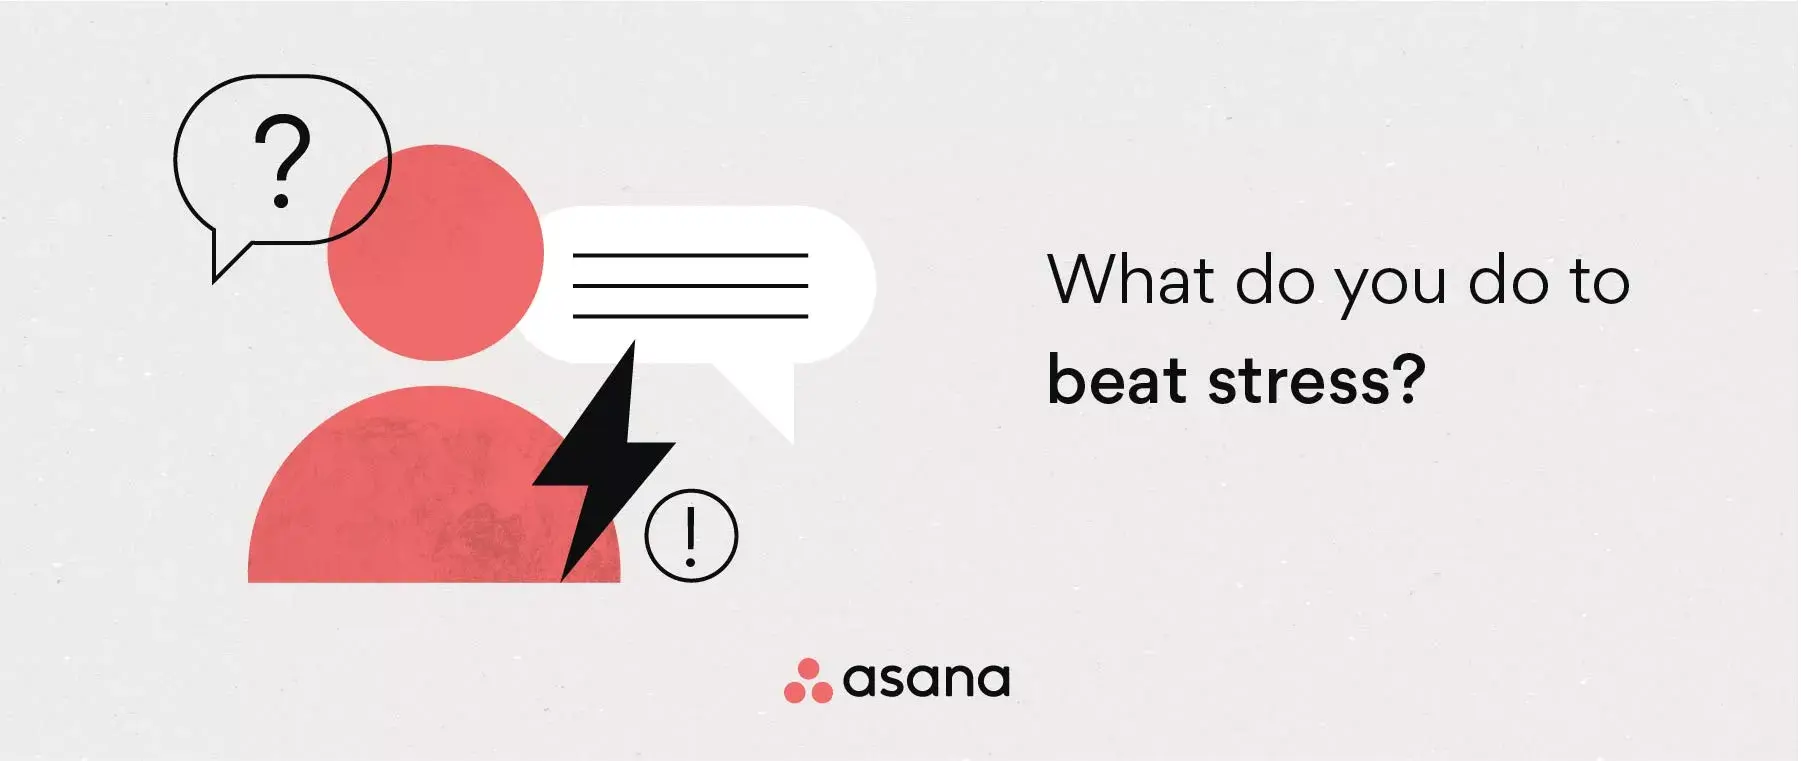 [inline illustration] Icebreaker questions about beating stress (example)